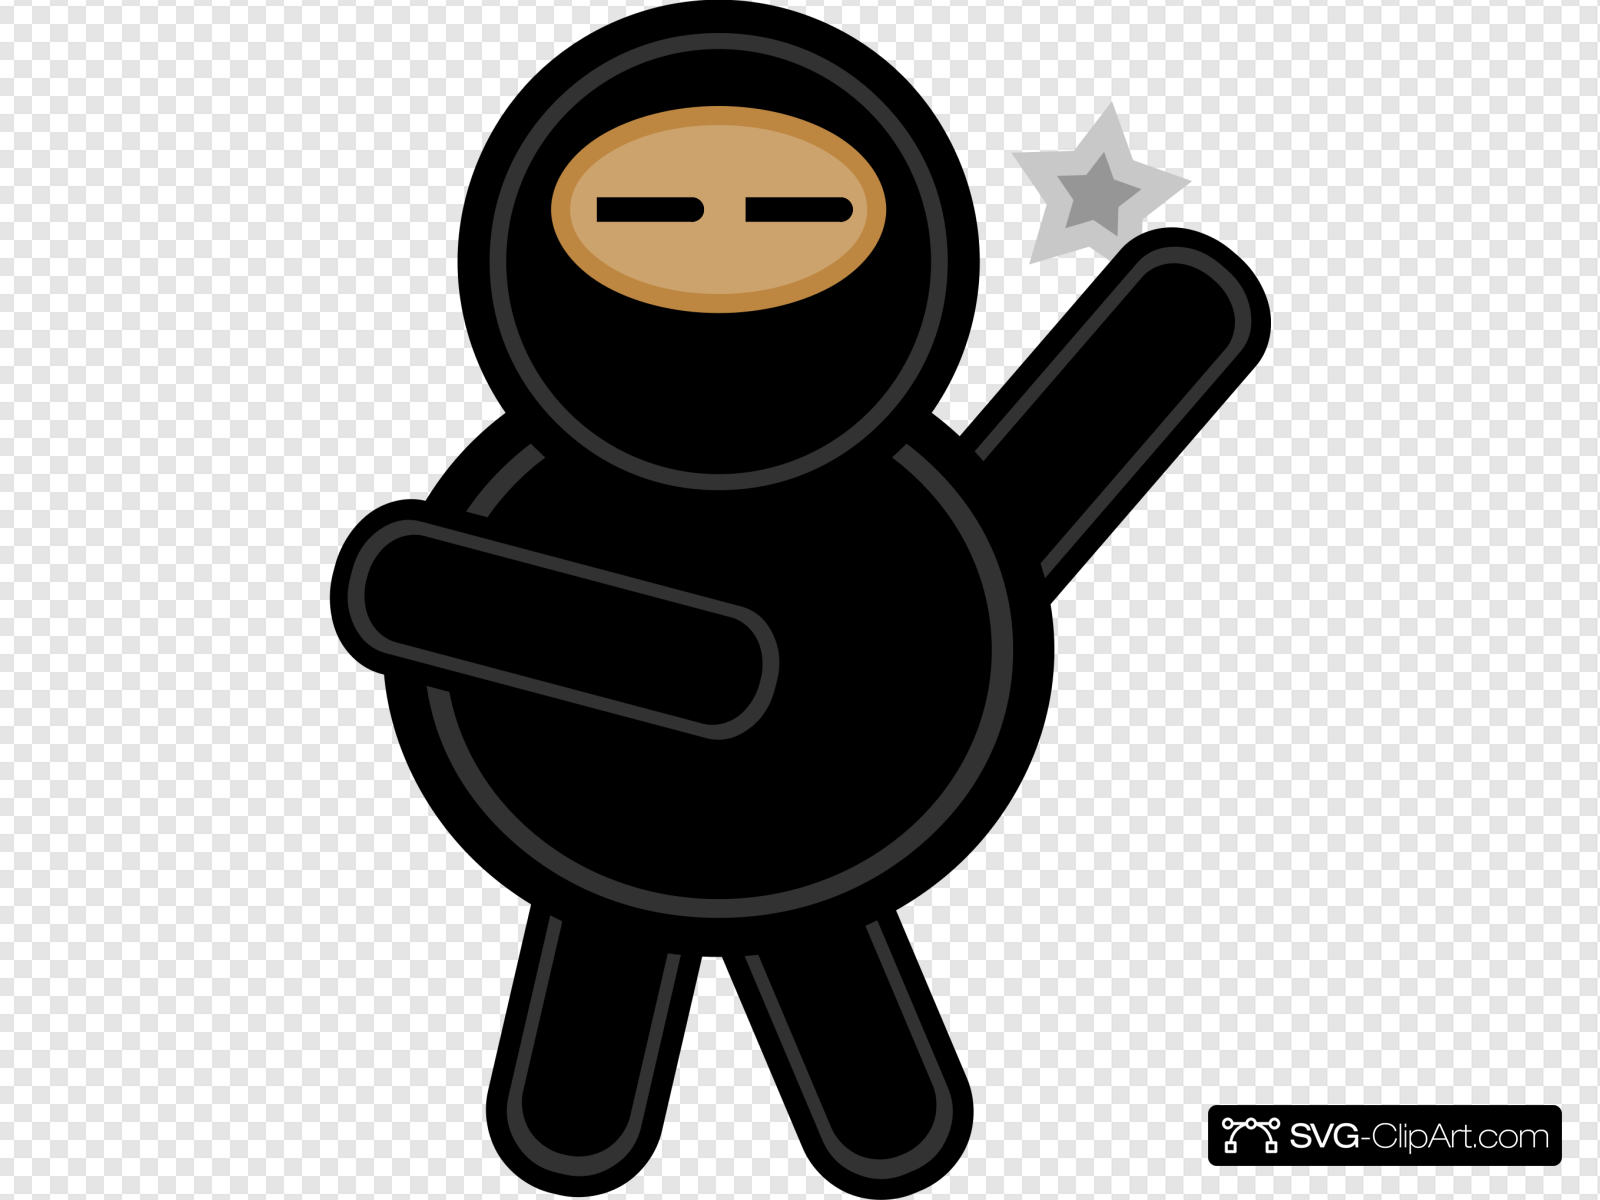 Download Ninja clipart svg pictures on Cliparts Pub 2020! 🔝